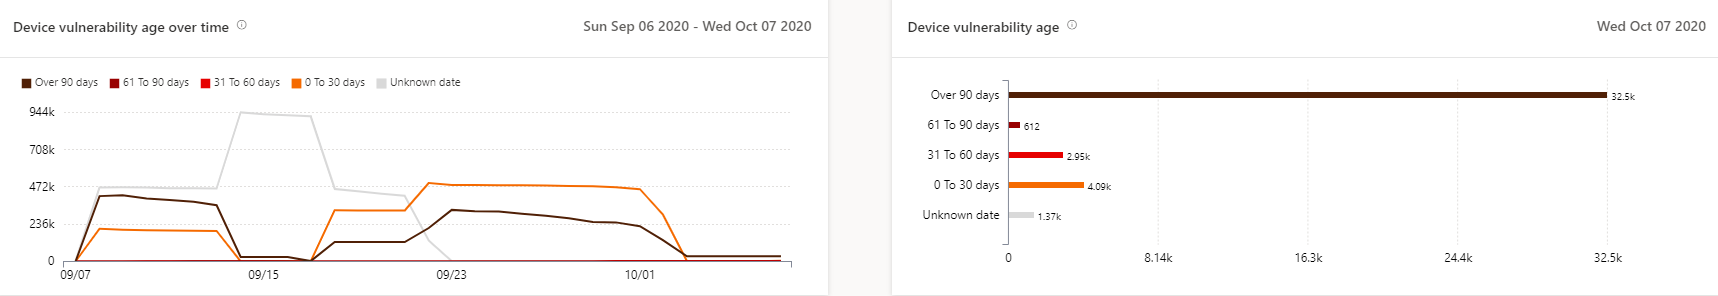 One graph of current device vulnerability age, and one graph showing age over time.